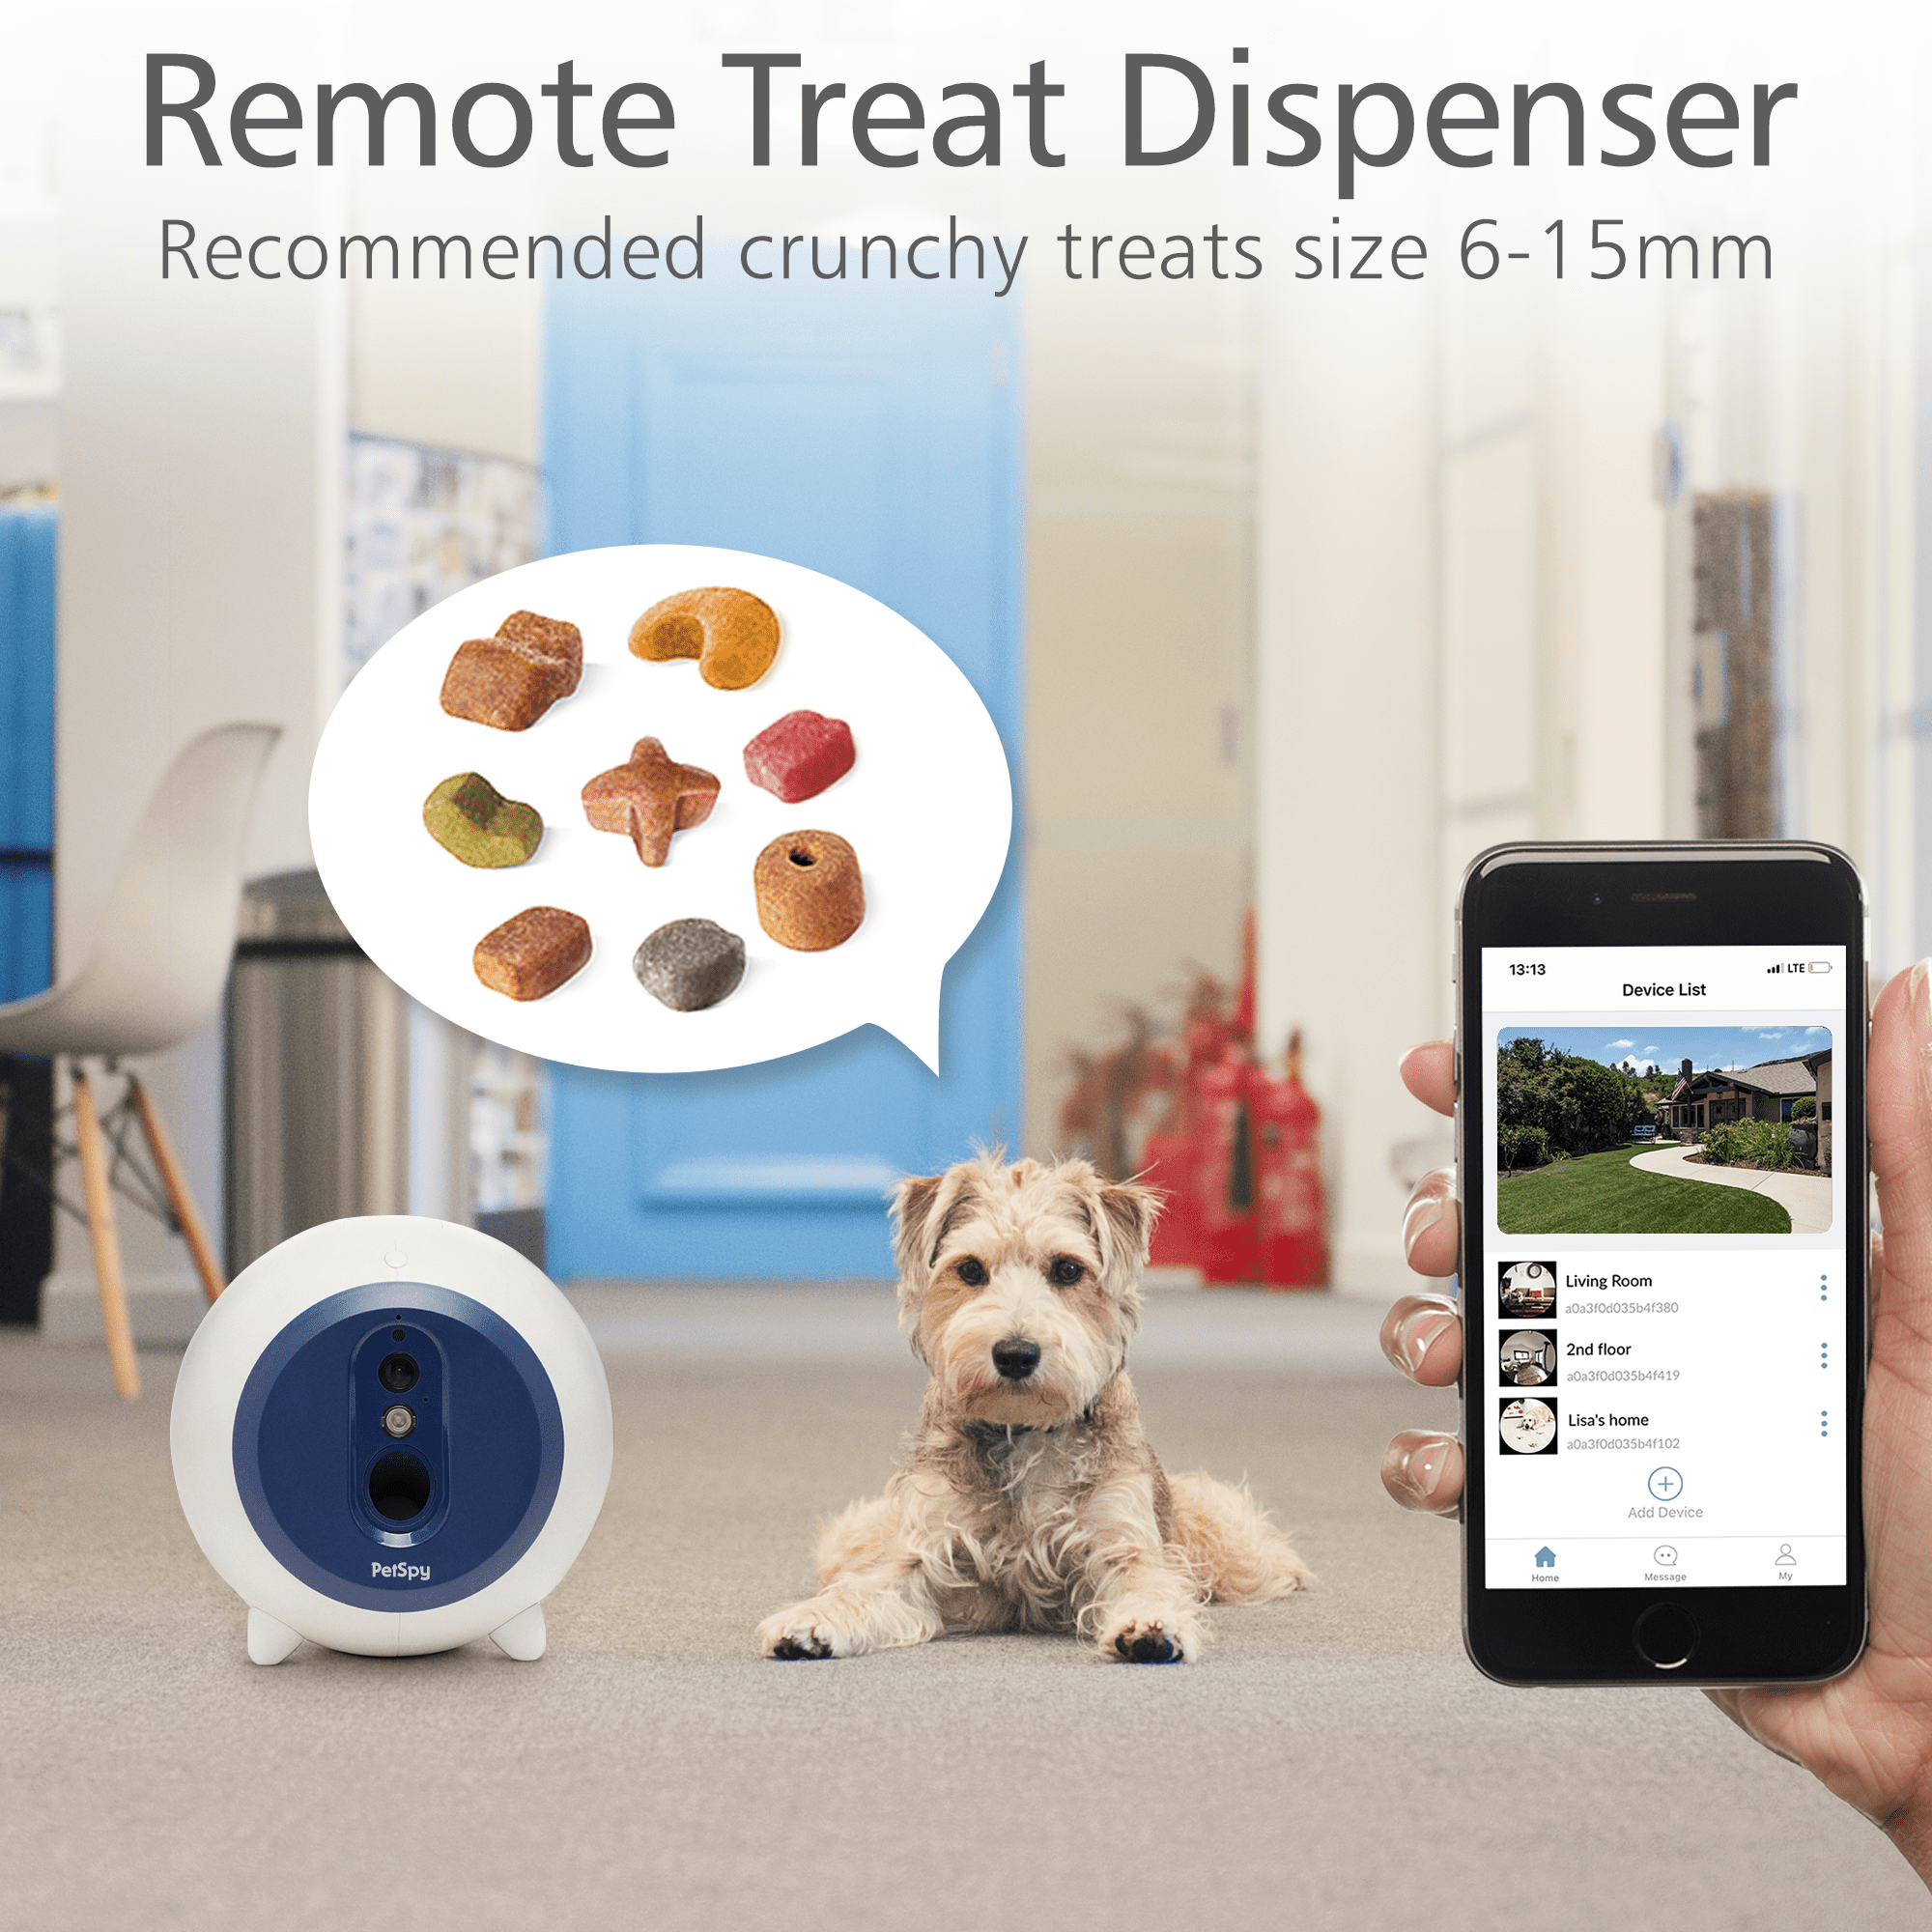 Pet Monitoring Camera Dog Treat Dispenser - CENGCEN Two-Way Audio HD WiFi  Dog Camera with 130 View, Remote Tossing App Compatible with Android/iOS,  Supports Cloud Storage, Night Vision, Wall Mounted